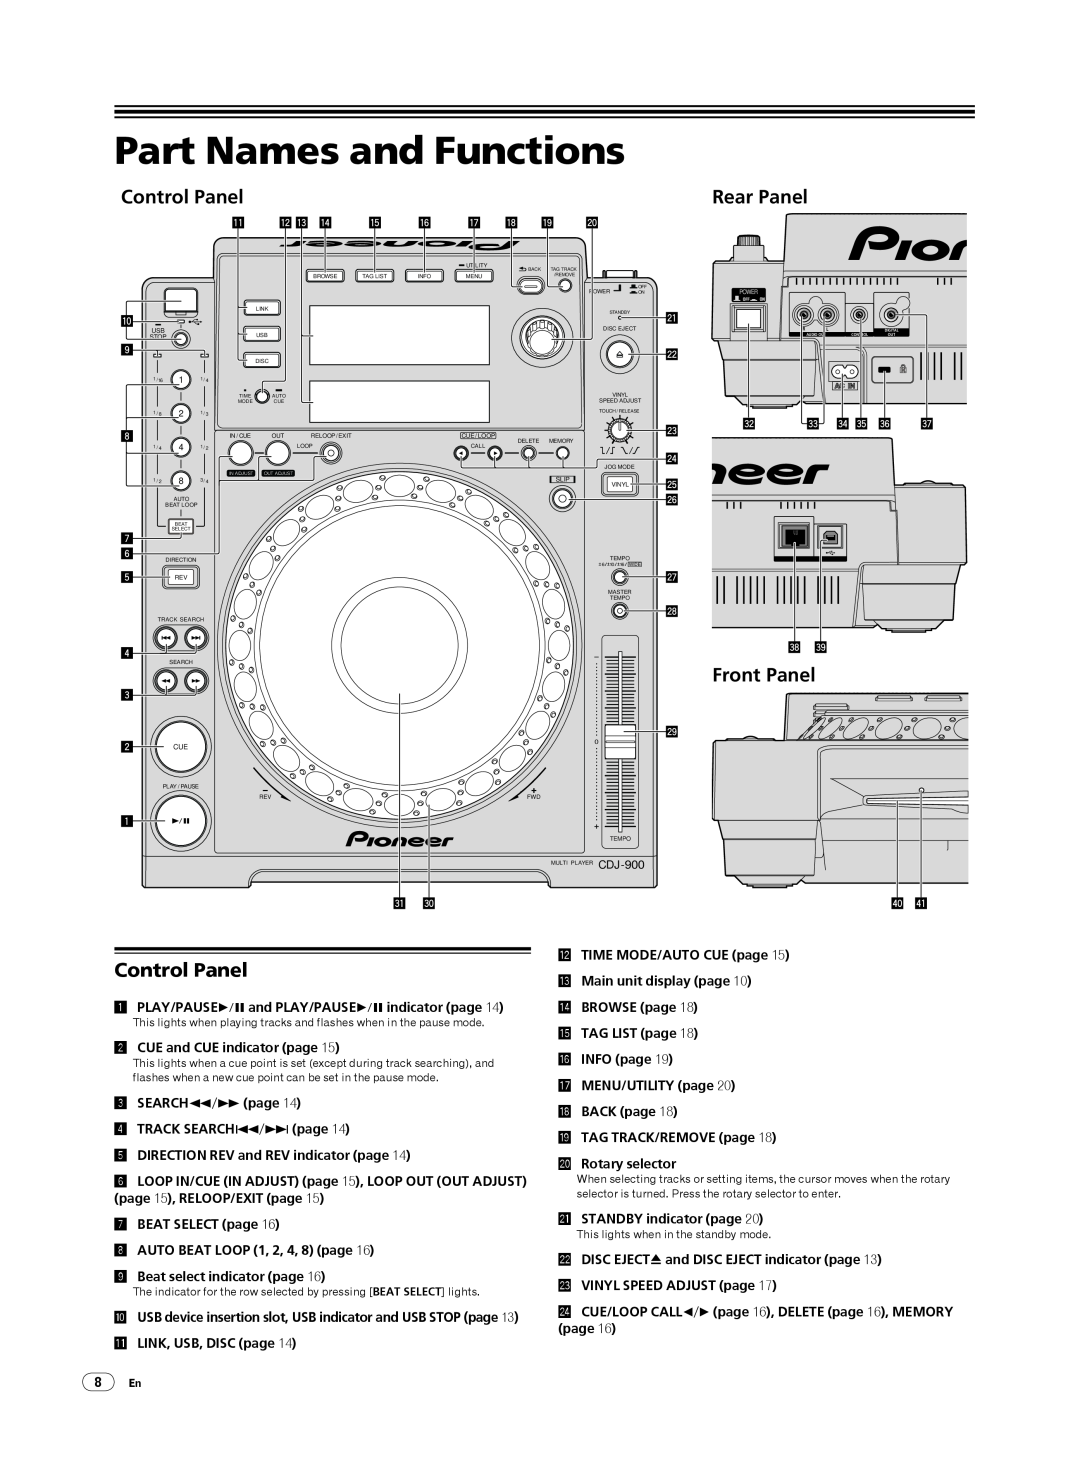 Pioneer CDJ-900, Multi Player operating instructions Part Names and Functions, Control Panel, Front Panel, Rear Panel 